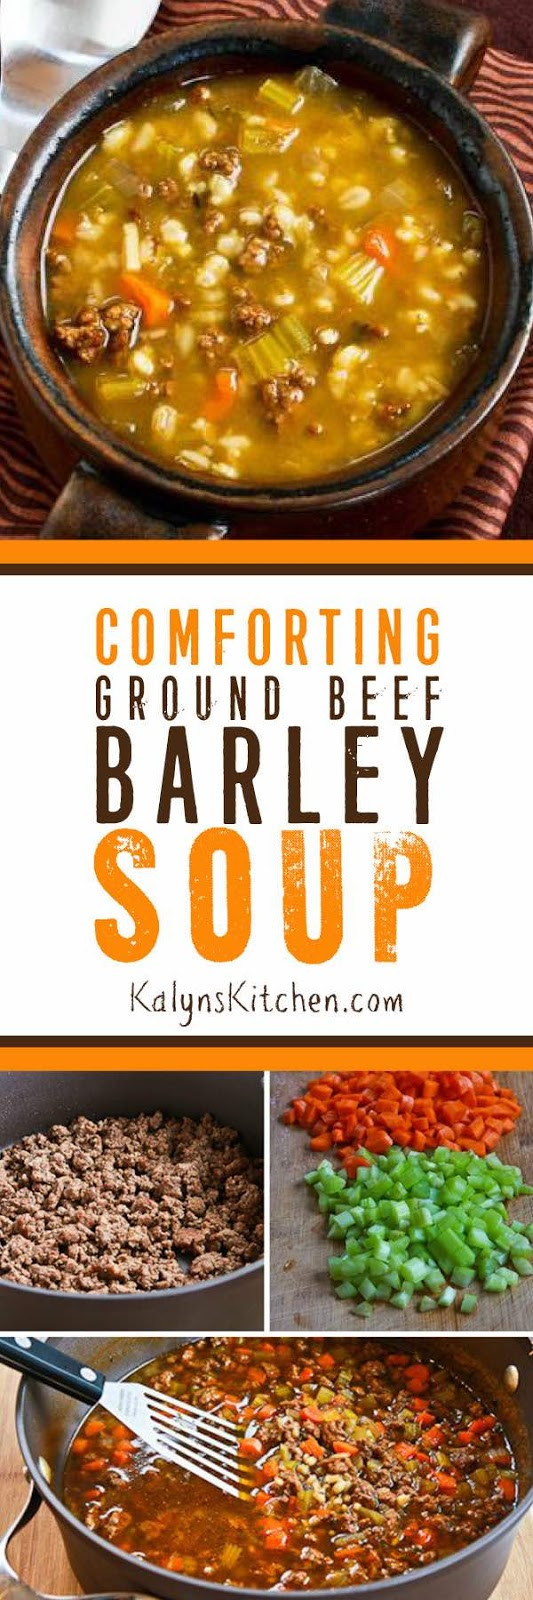 Ground Beef Barley Soup
 forting Ground Beef and Barley Soup Kalyn s Kitchen